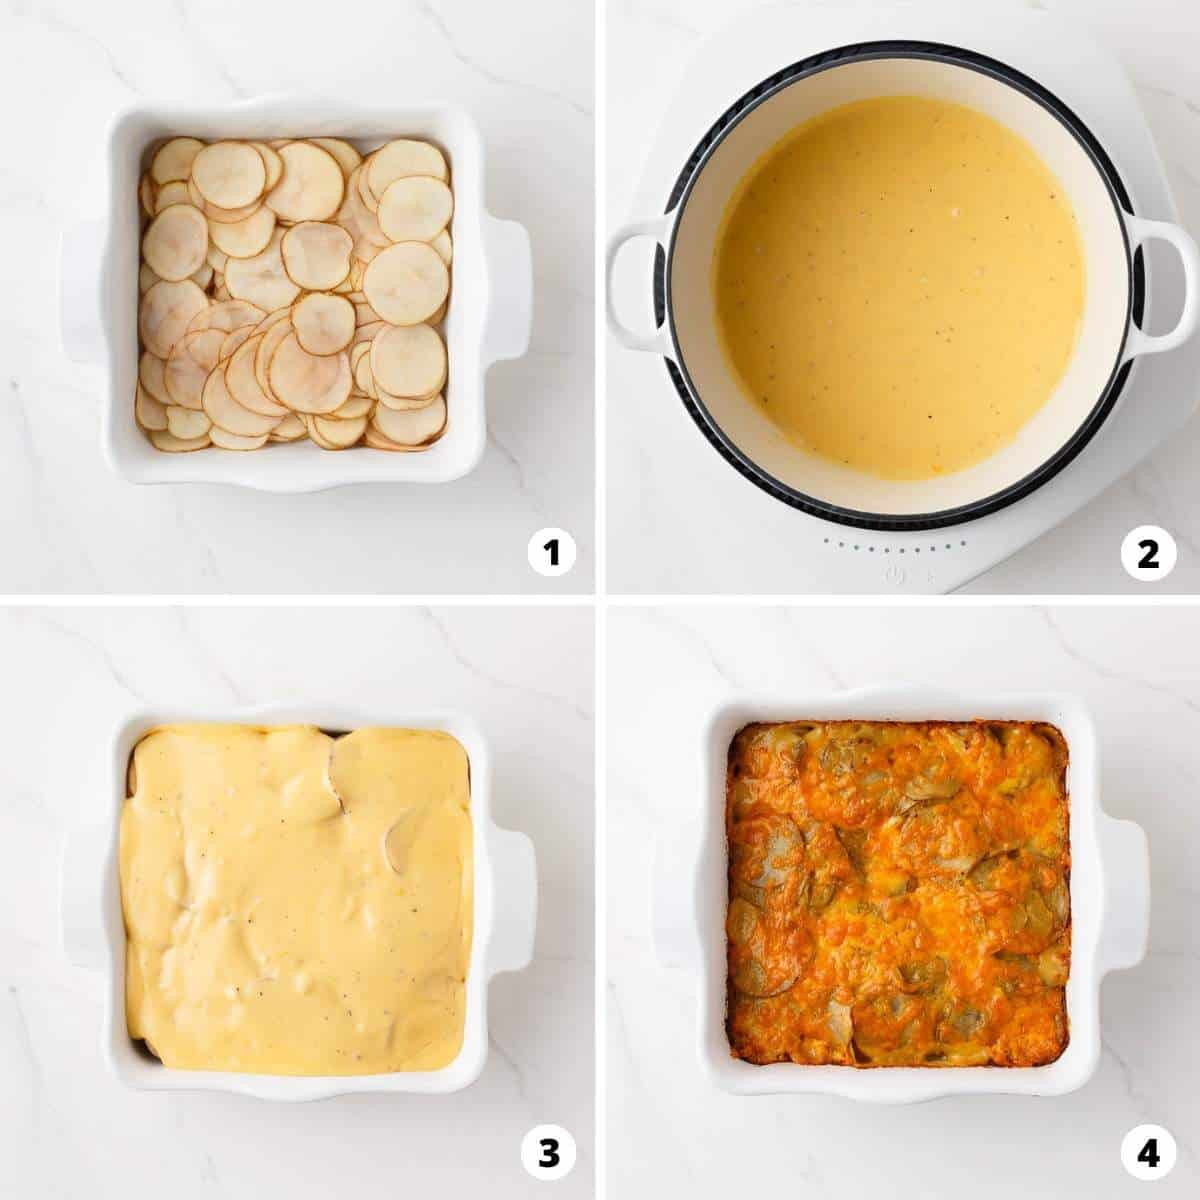 Showing how to make potatoes au gratin in a 4 step collage.